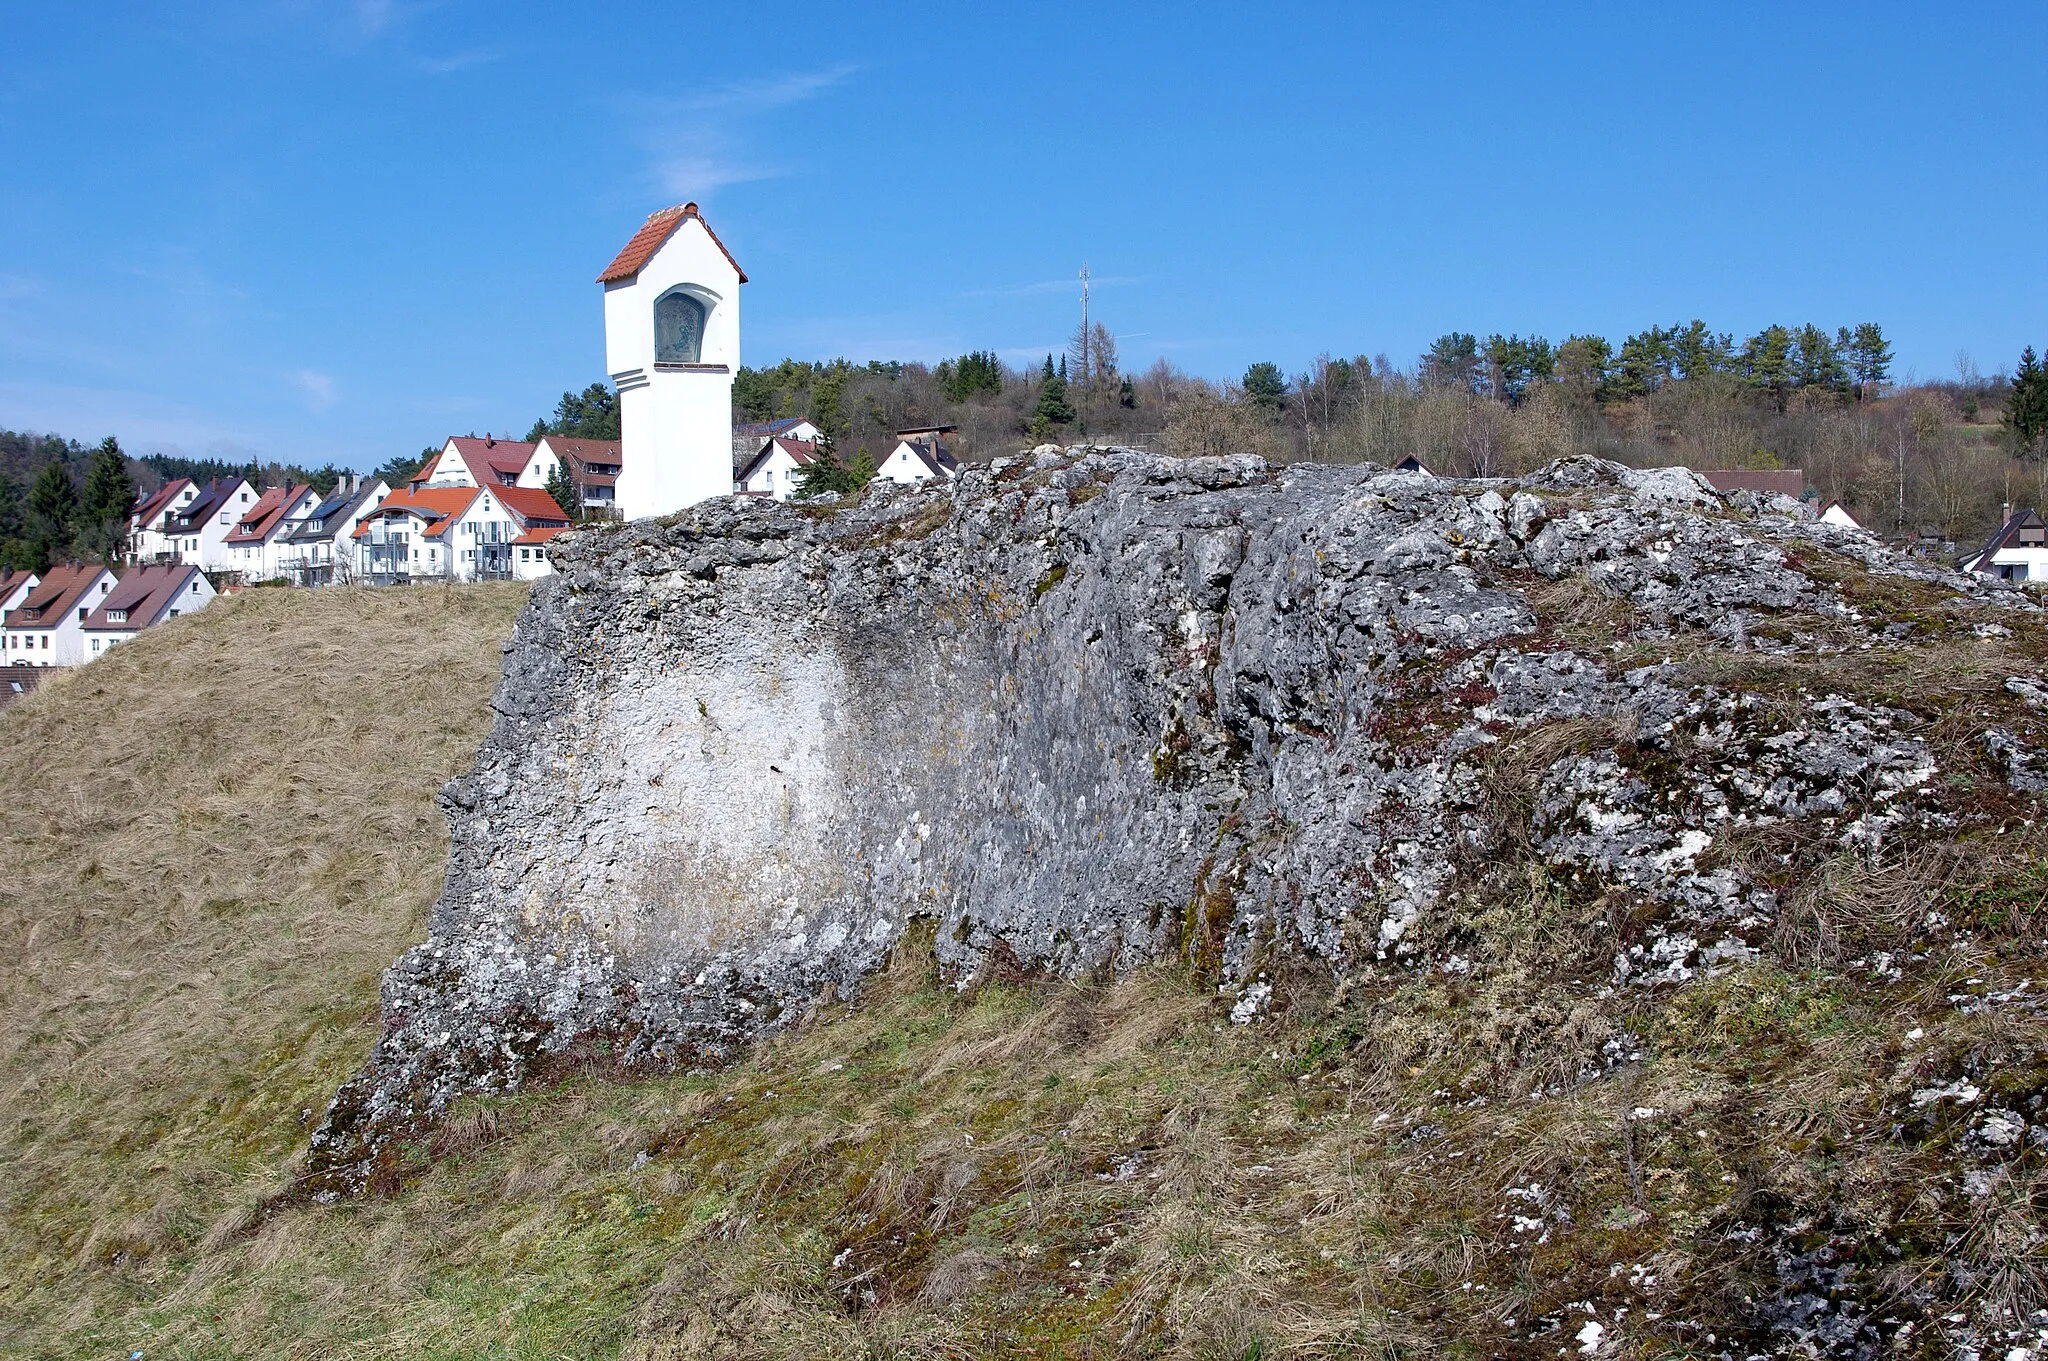 Photo showing: The ruined castle of Ehrenstein